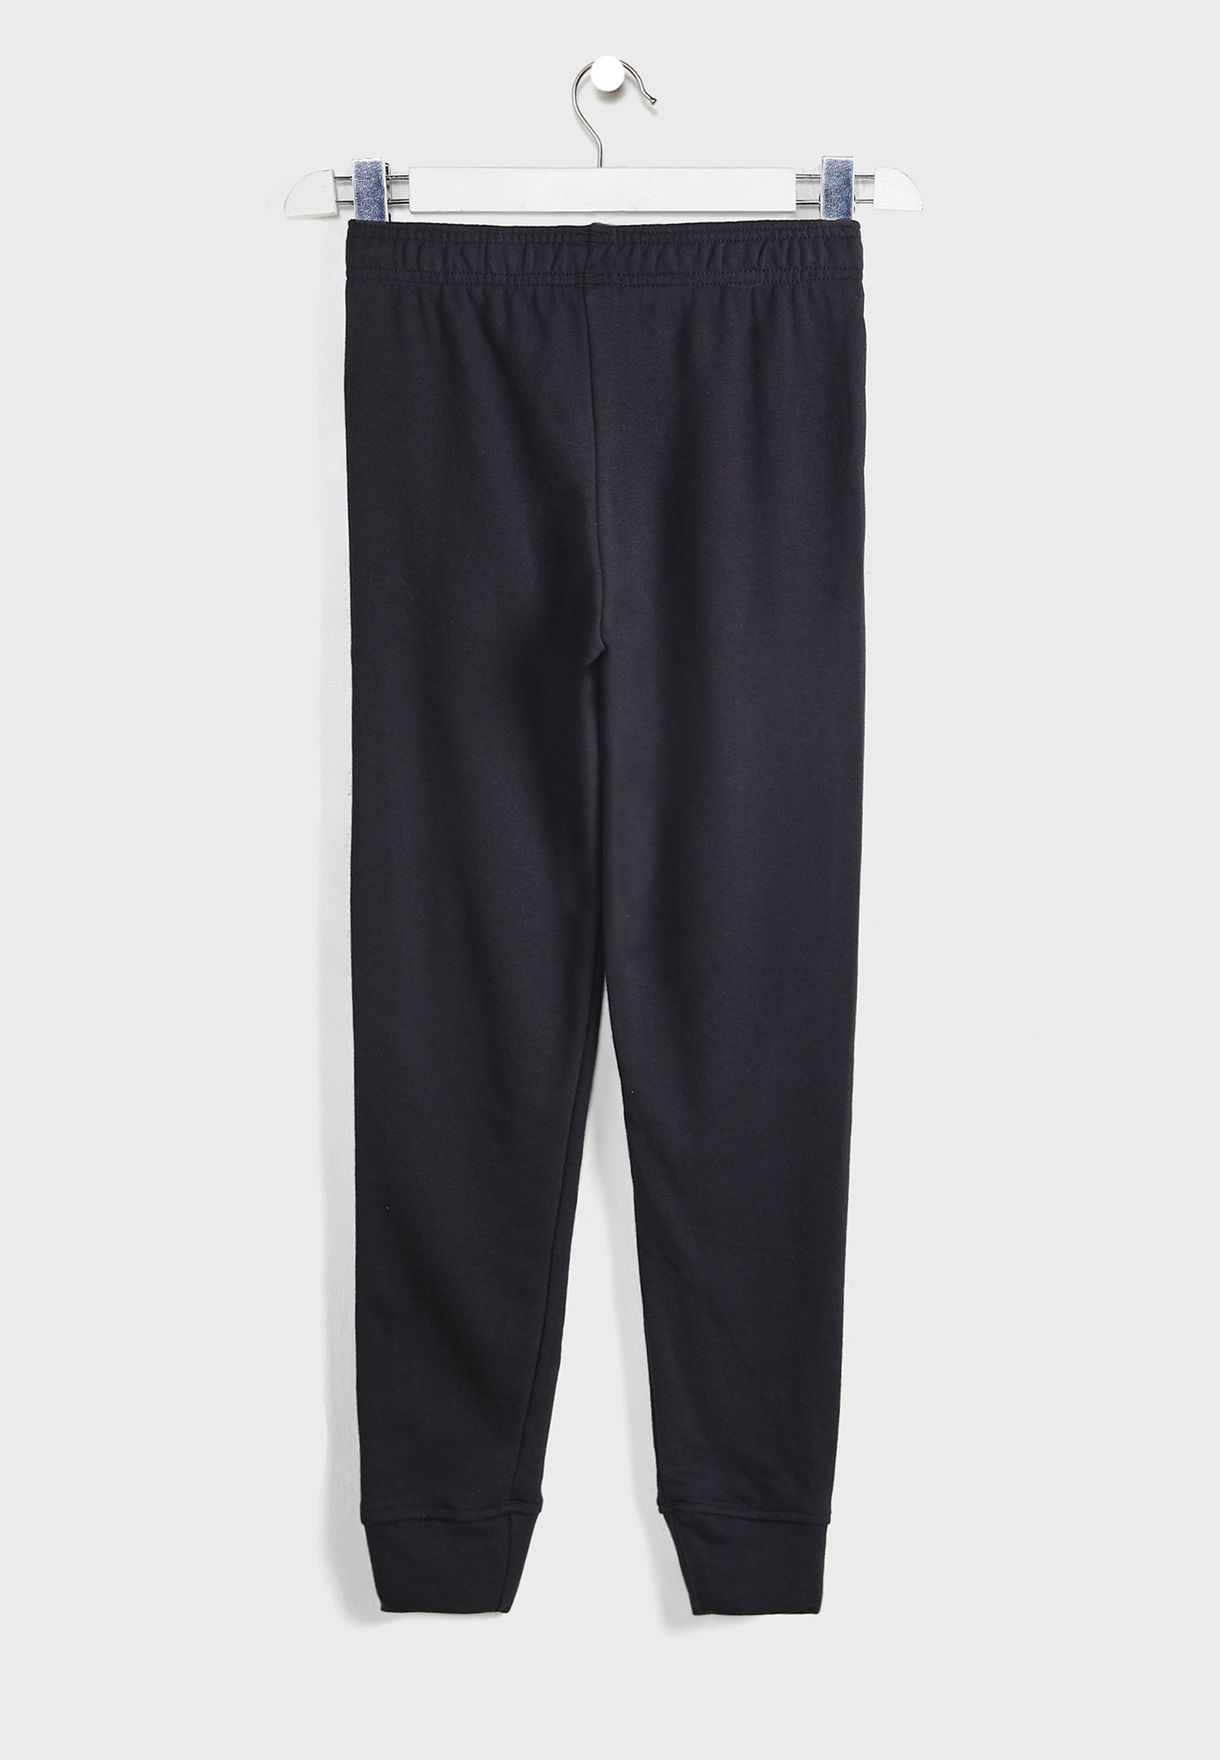 Youth Rival Terry Sweatpants